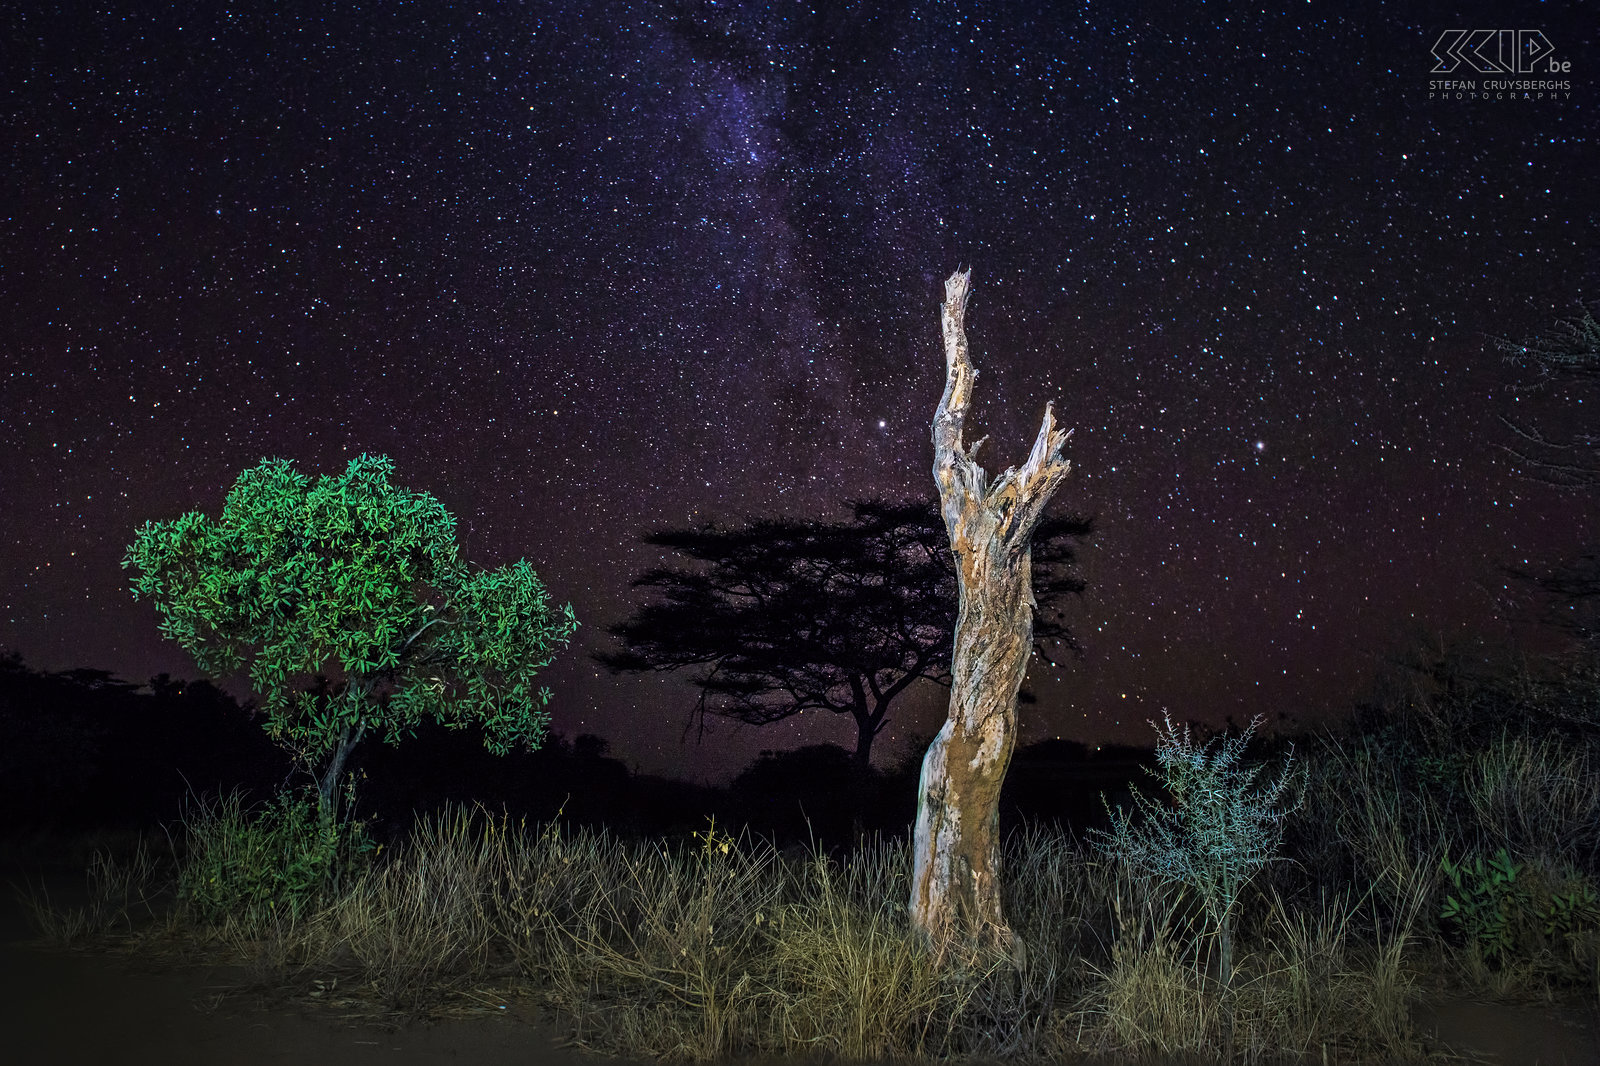 Samburu - Starry sky and milky way At night the African sky is astonishing. So I tried to take some photos of the wonderful starry sky and the milky way. I made this photo just outside our campsite in Samburu NP and I used my flash light to lighten the trees in the foreground.<br />
 Stefan Cruysberghs